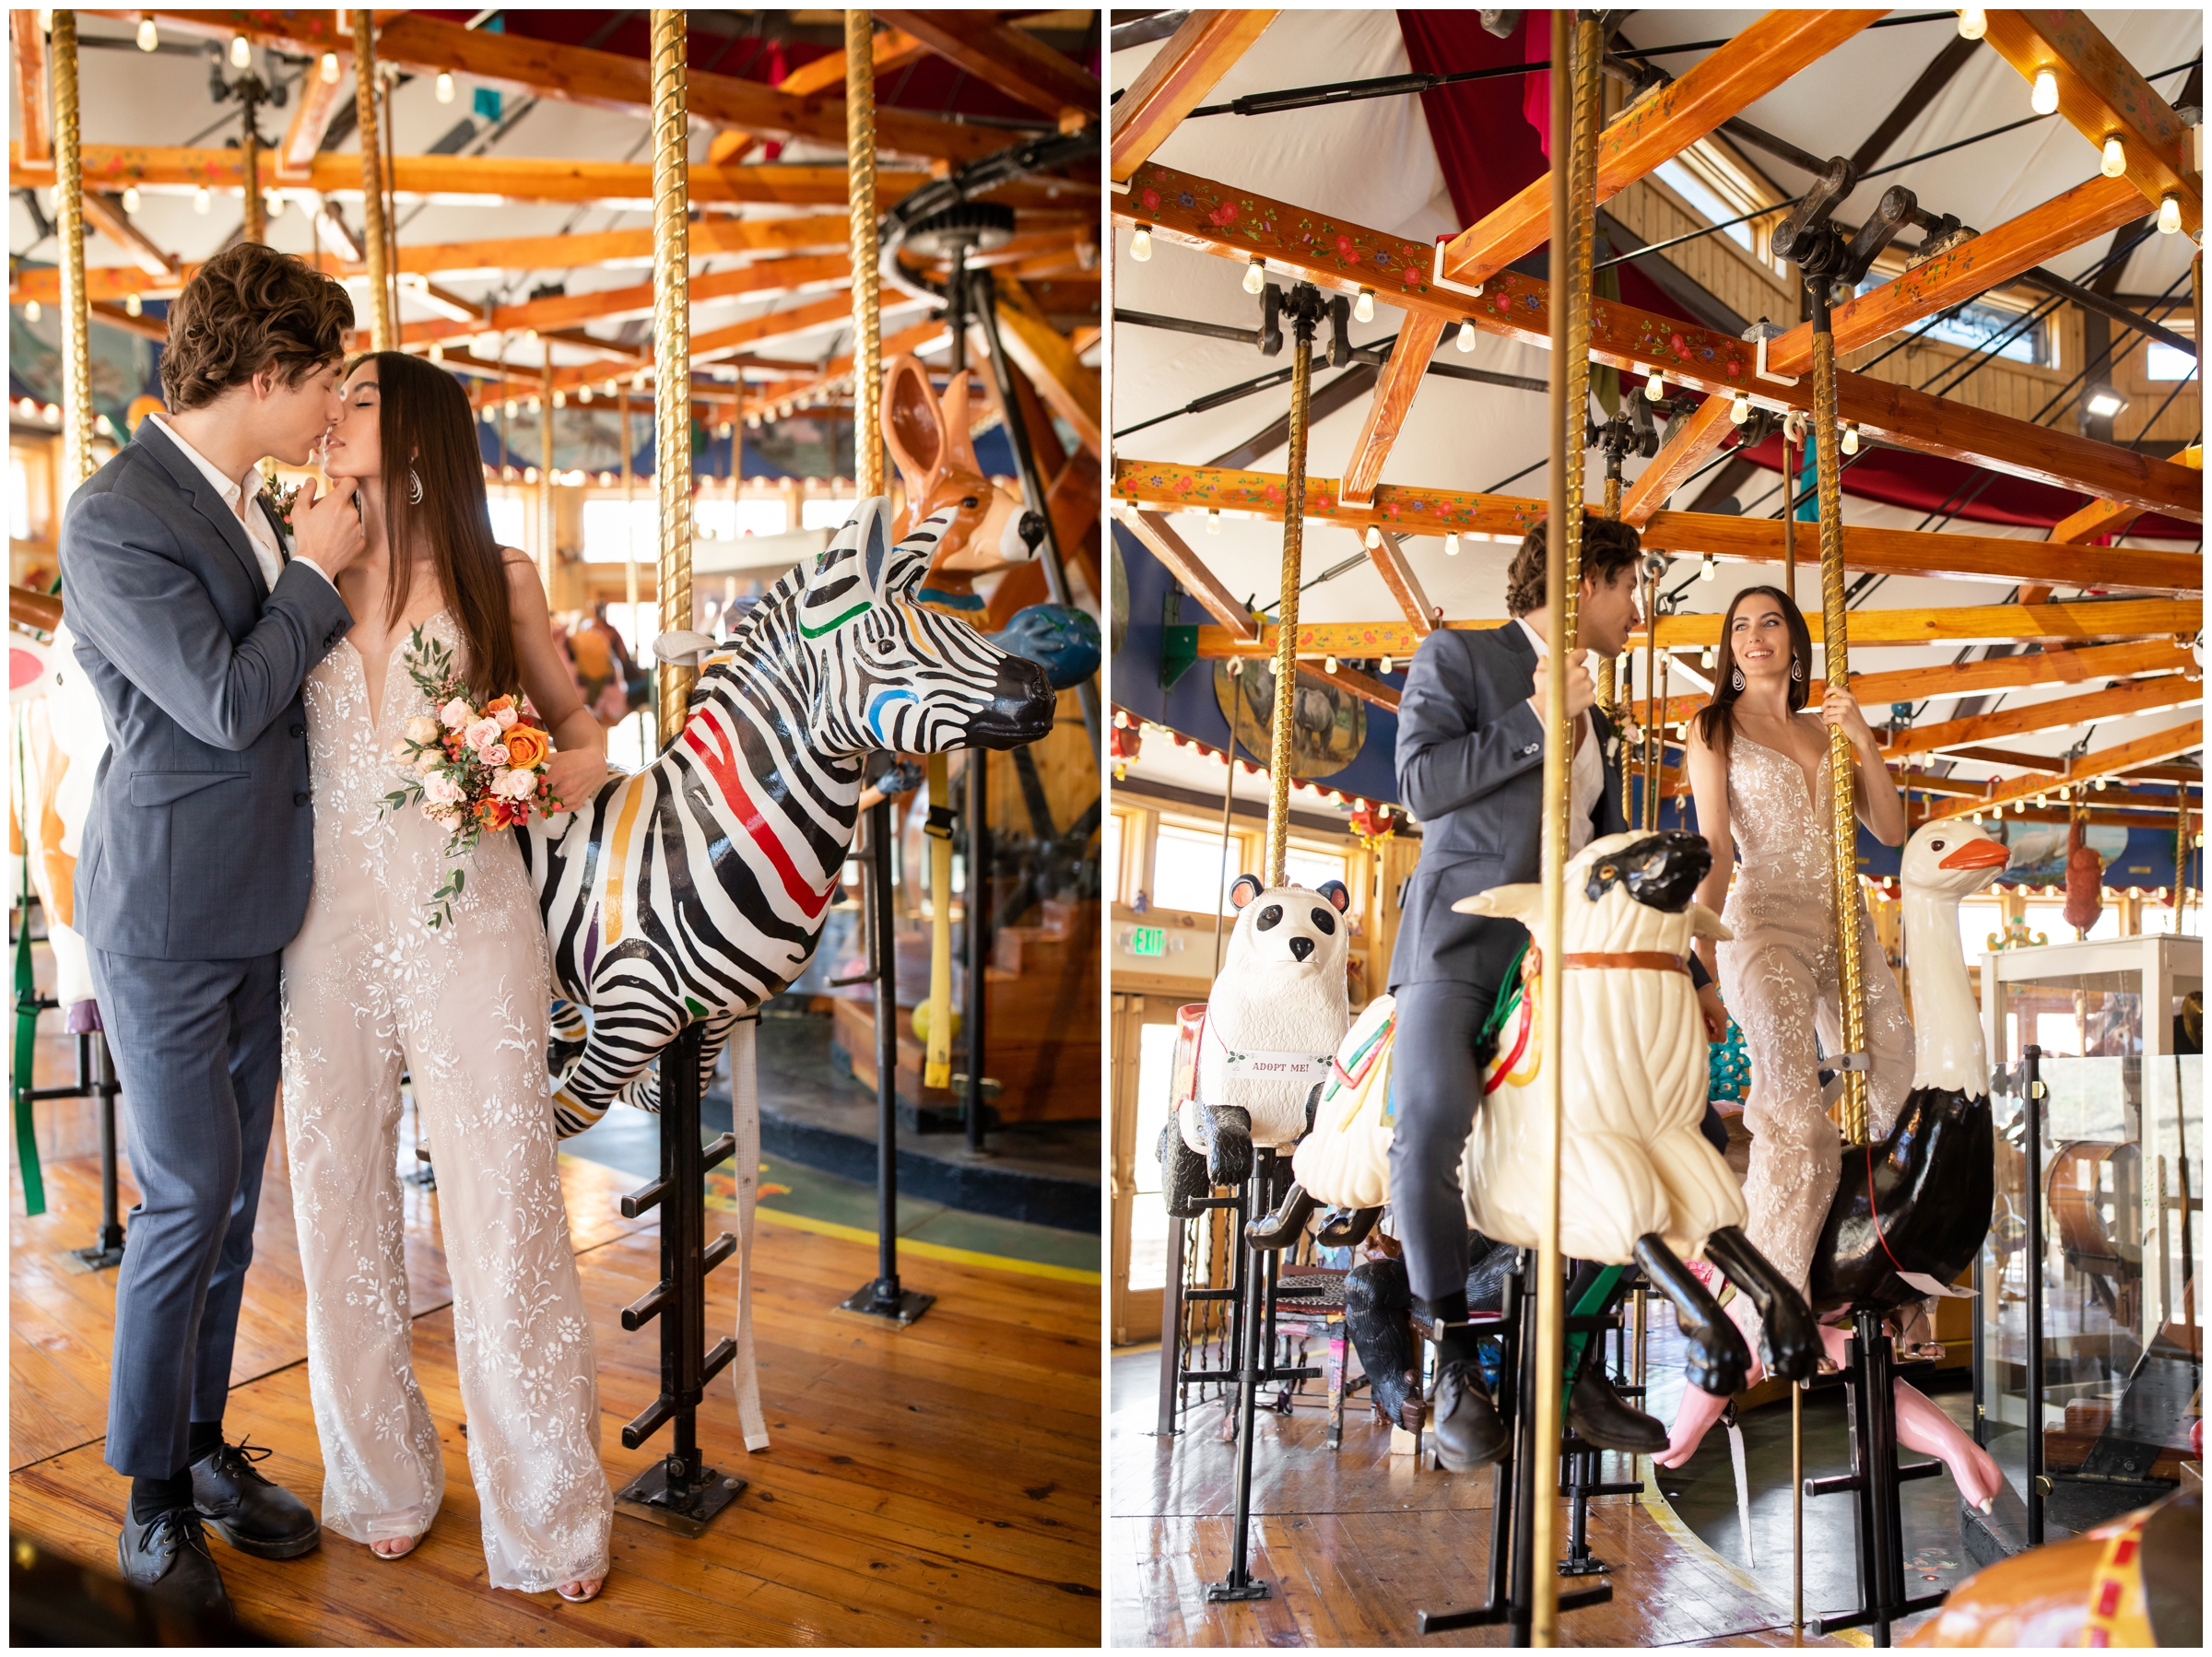 couple riding on carousel during unique wedding elopement in the Colorado mountains by Plum Pretty Photography 